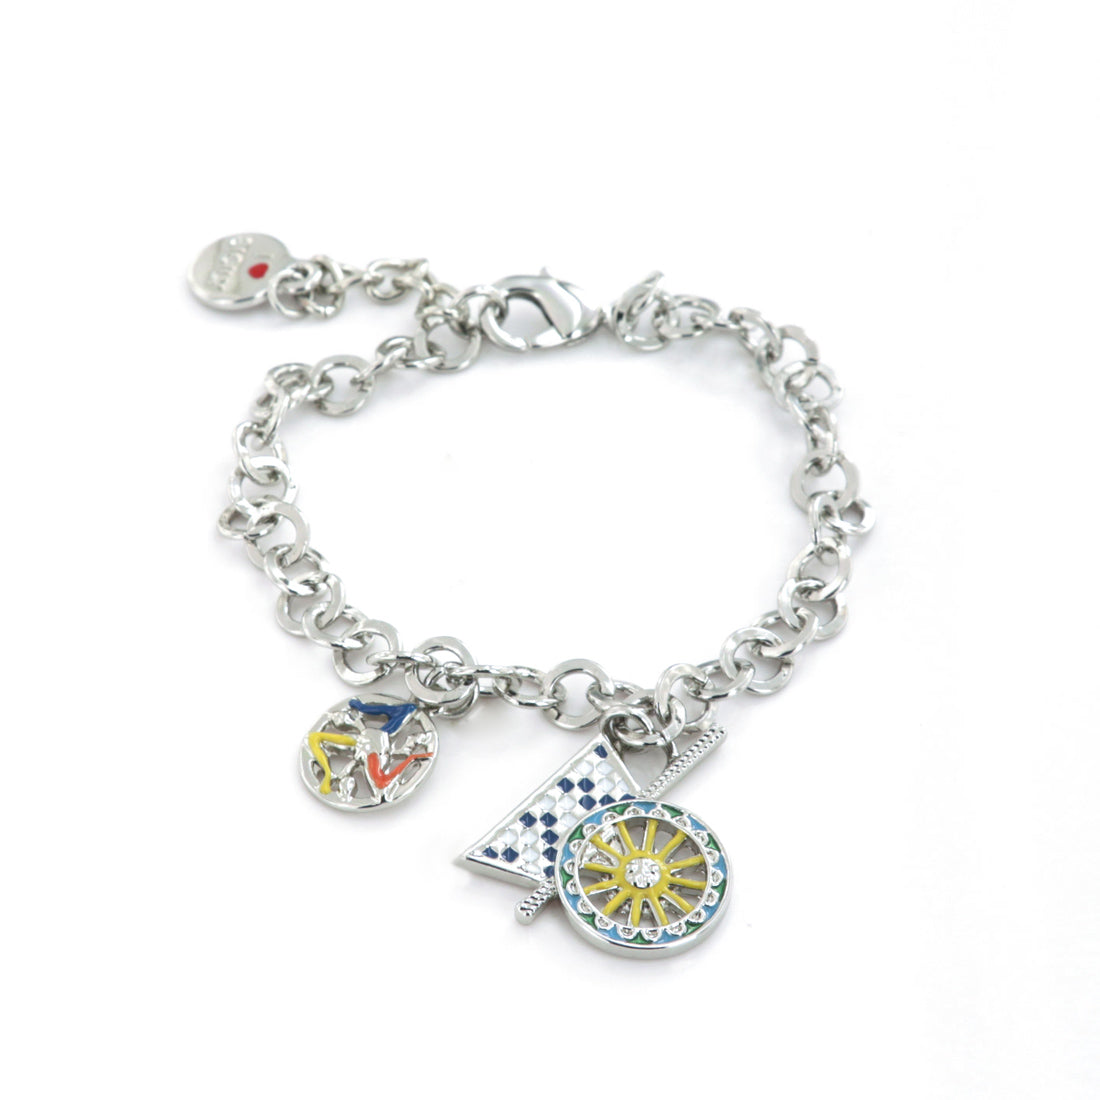 Rolò shirt metal bracelet, with a sloping Sicilian cart embellished with colored glazes